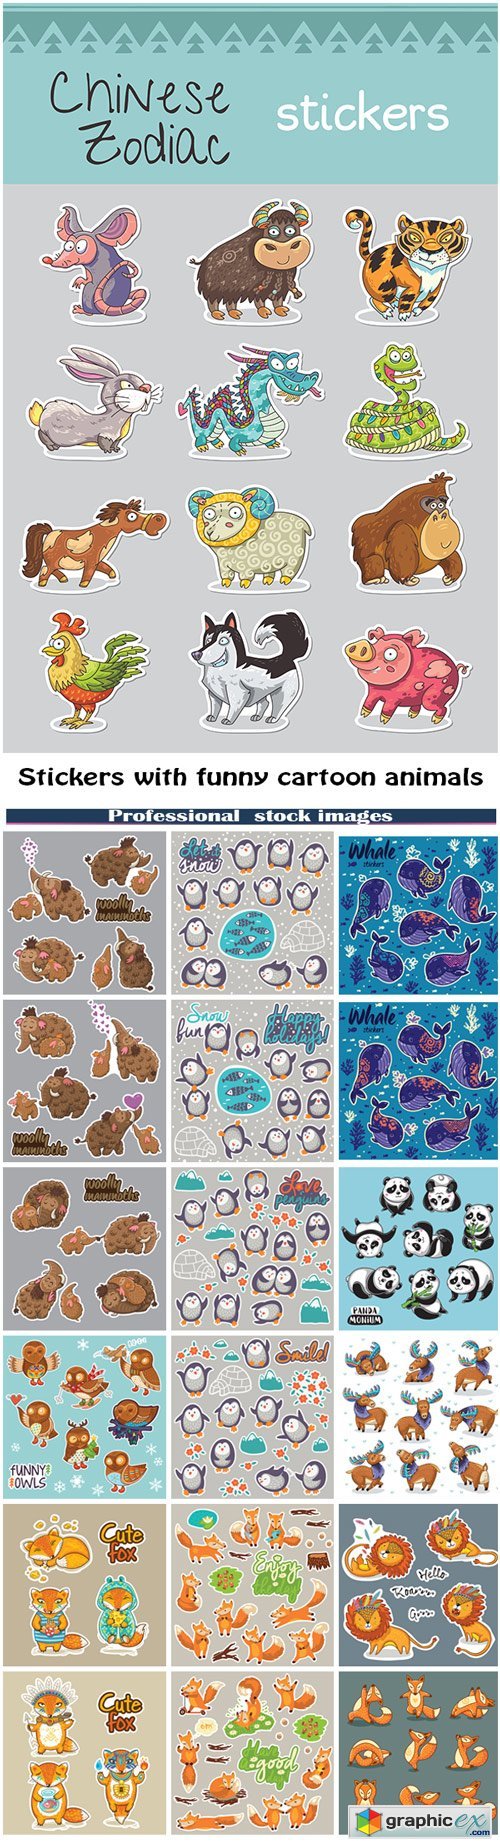 Collection of stickers with funny cartoon animals